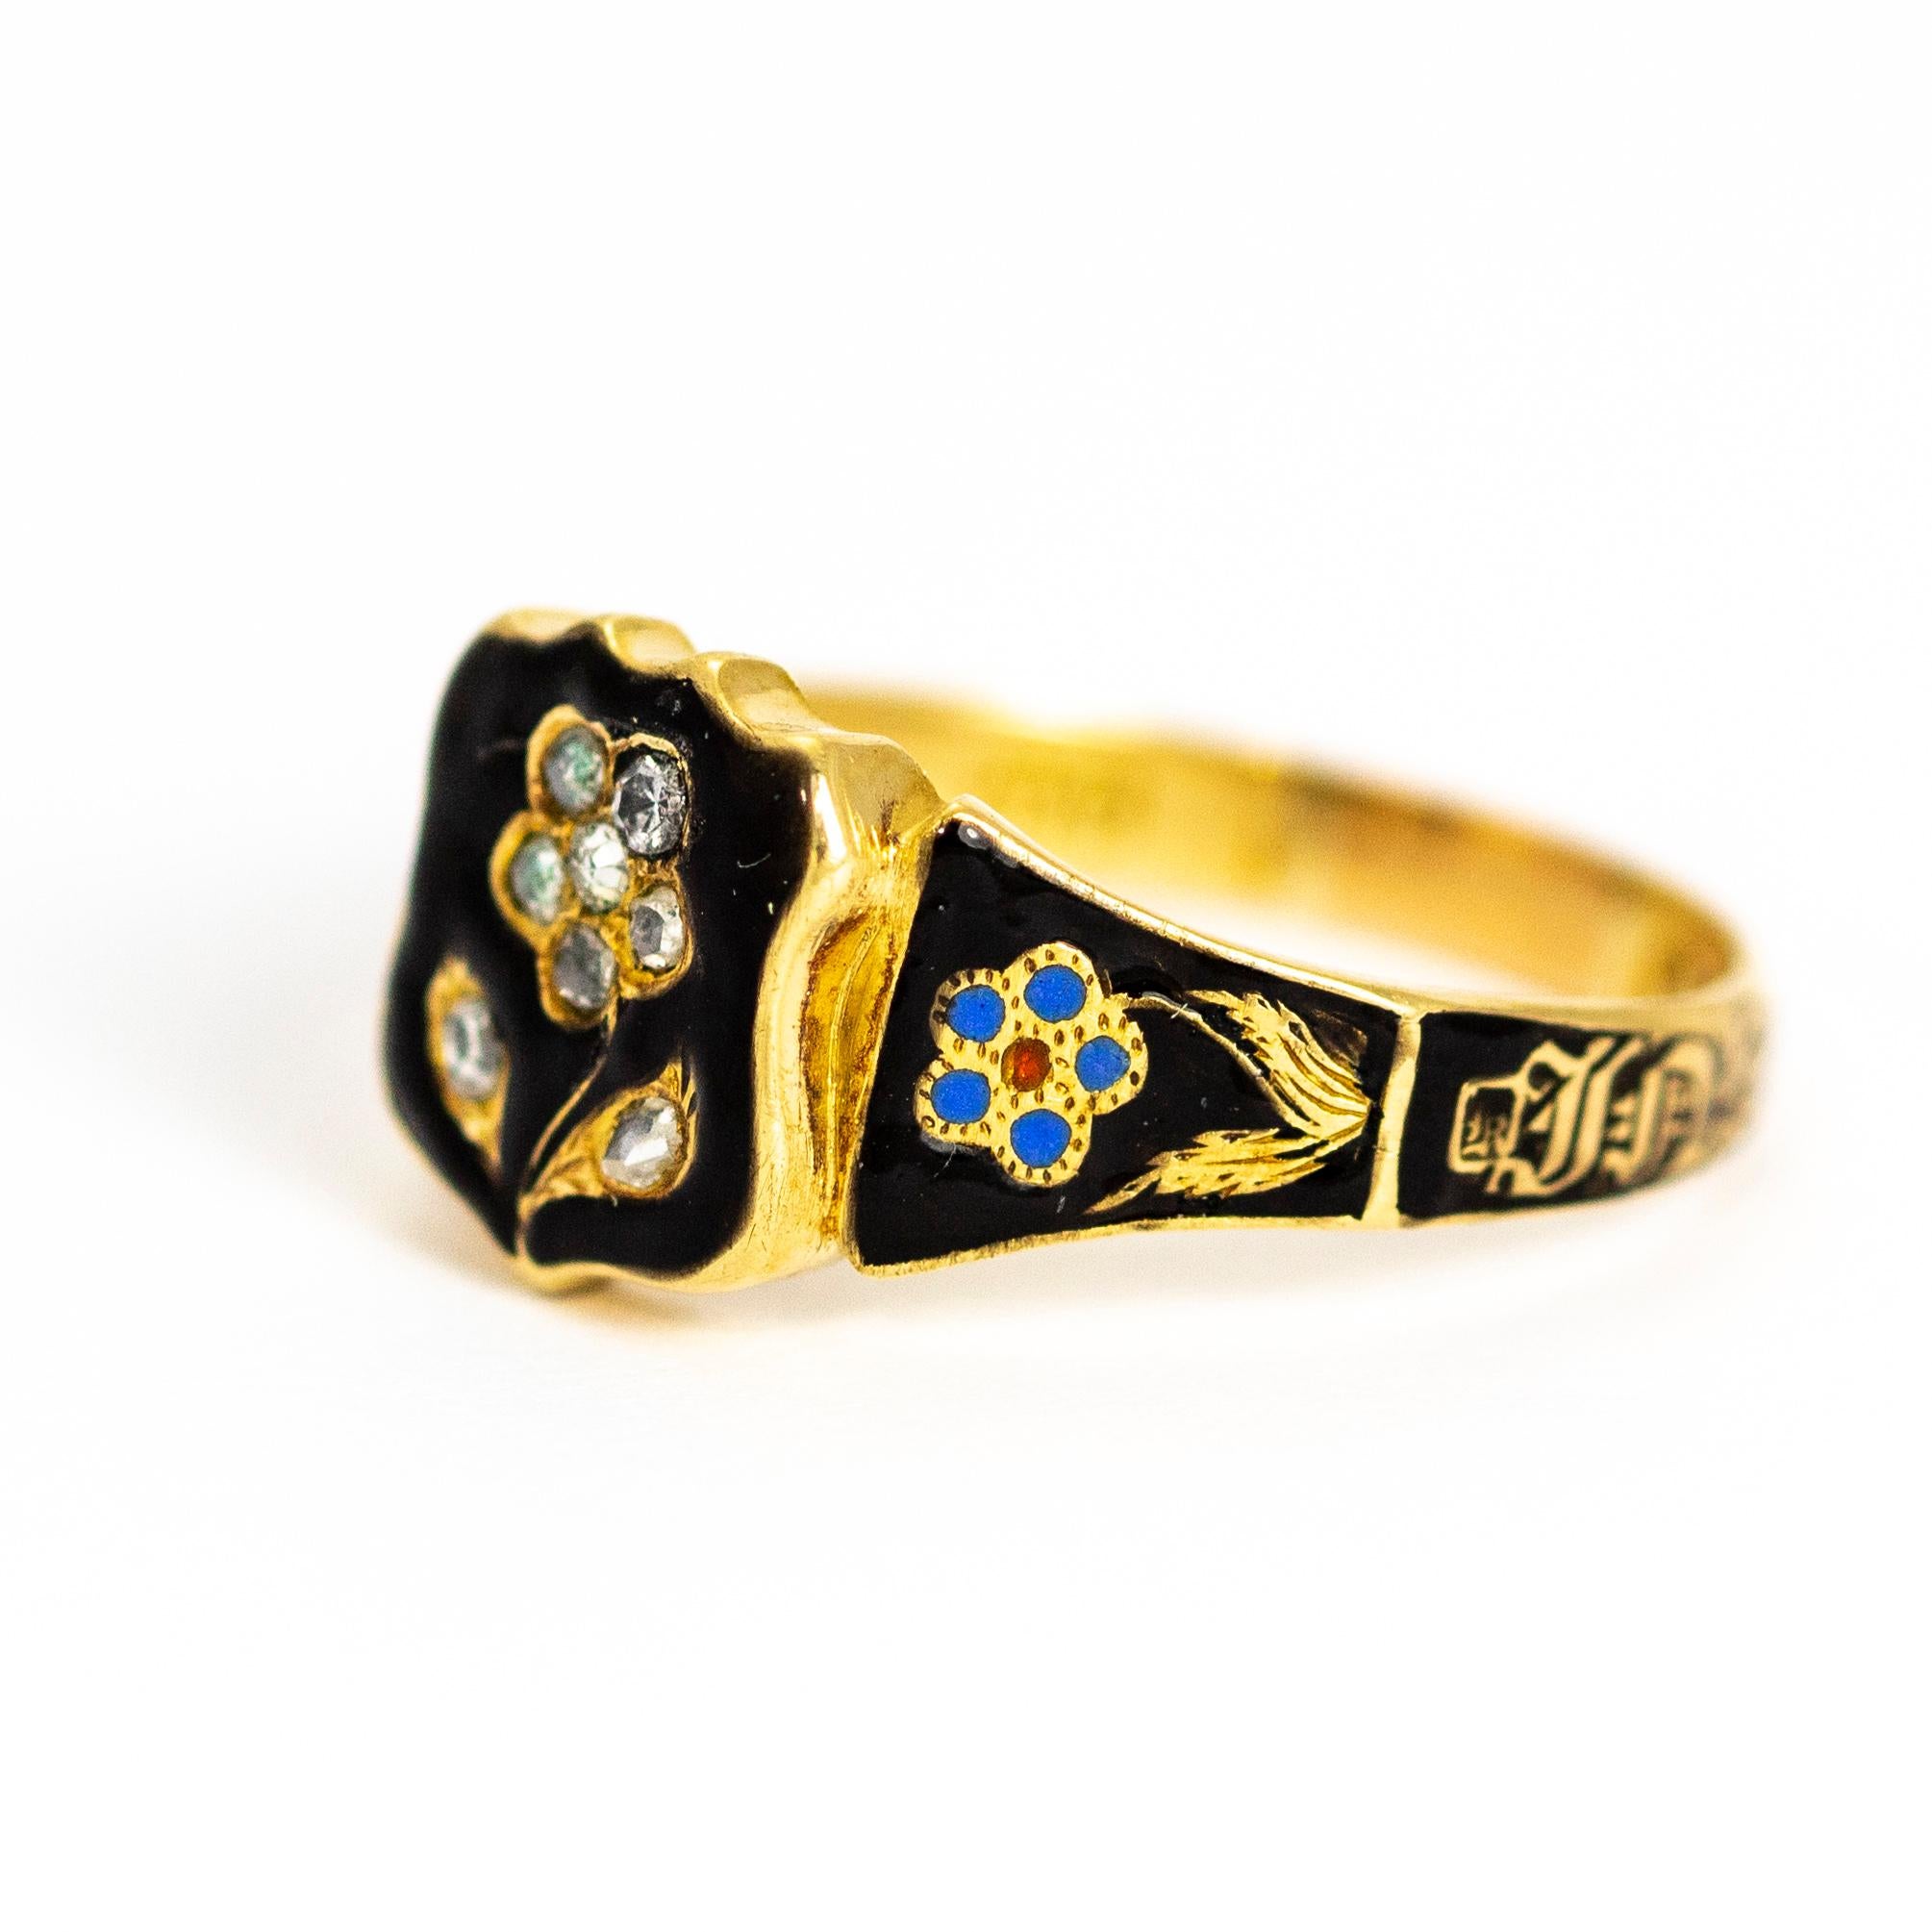 This forget me not mourning ring has so much lovely detail and even has a locket back. The shield shaped panel at the heart of the ring holds the forget me not which is adorned with rose cut diamonds and the shoulders feature two more flowers